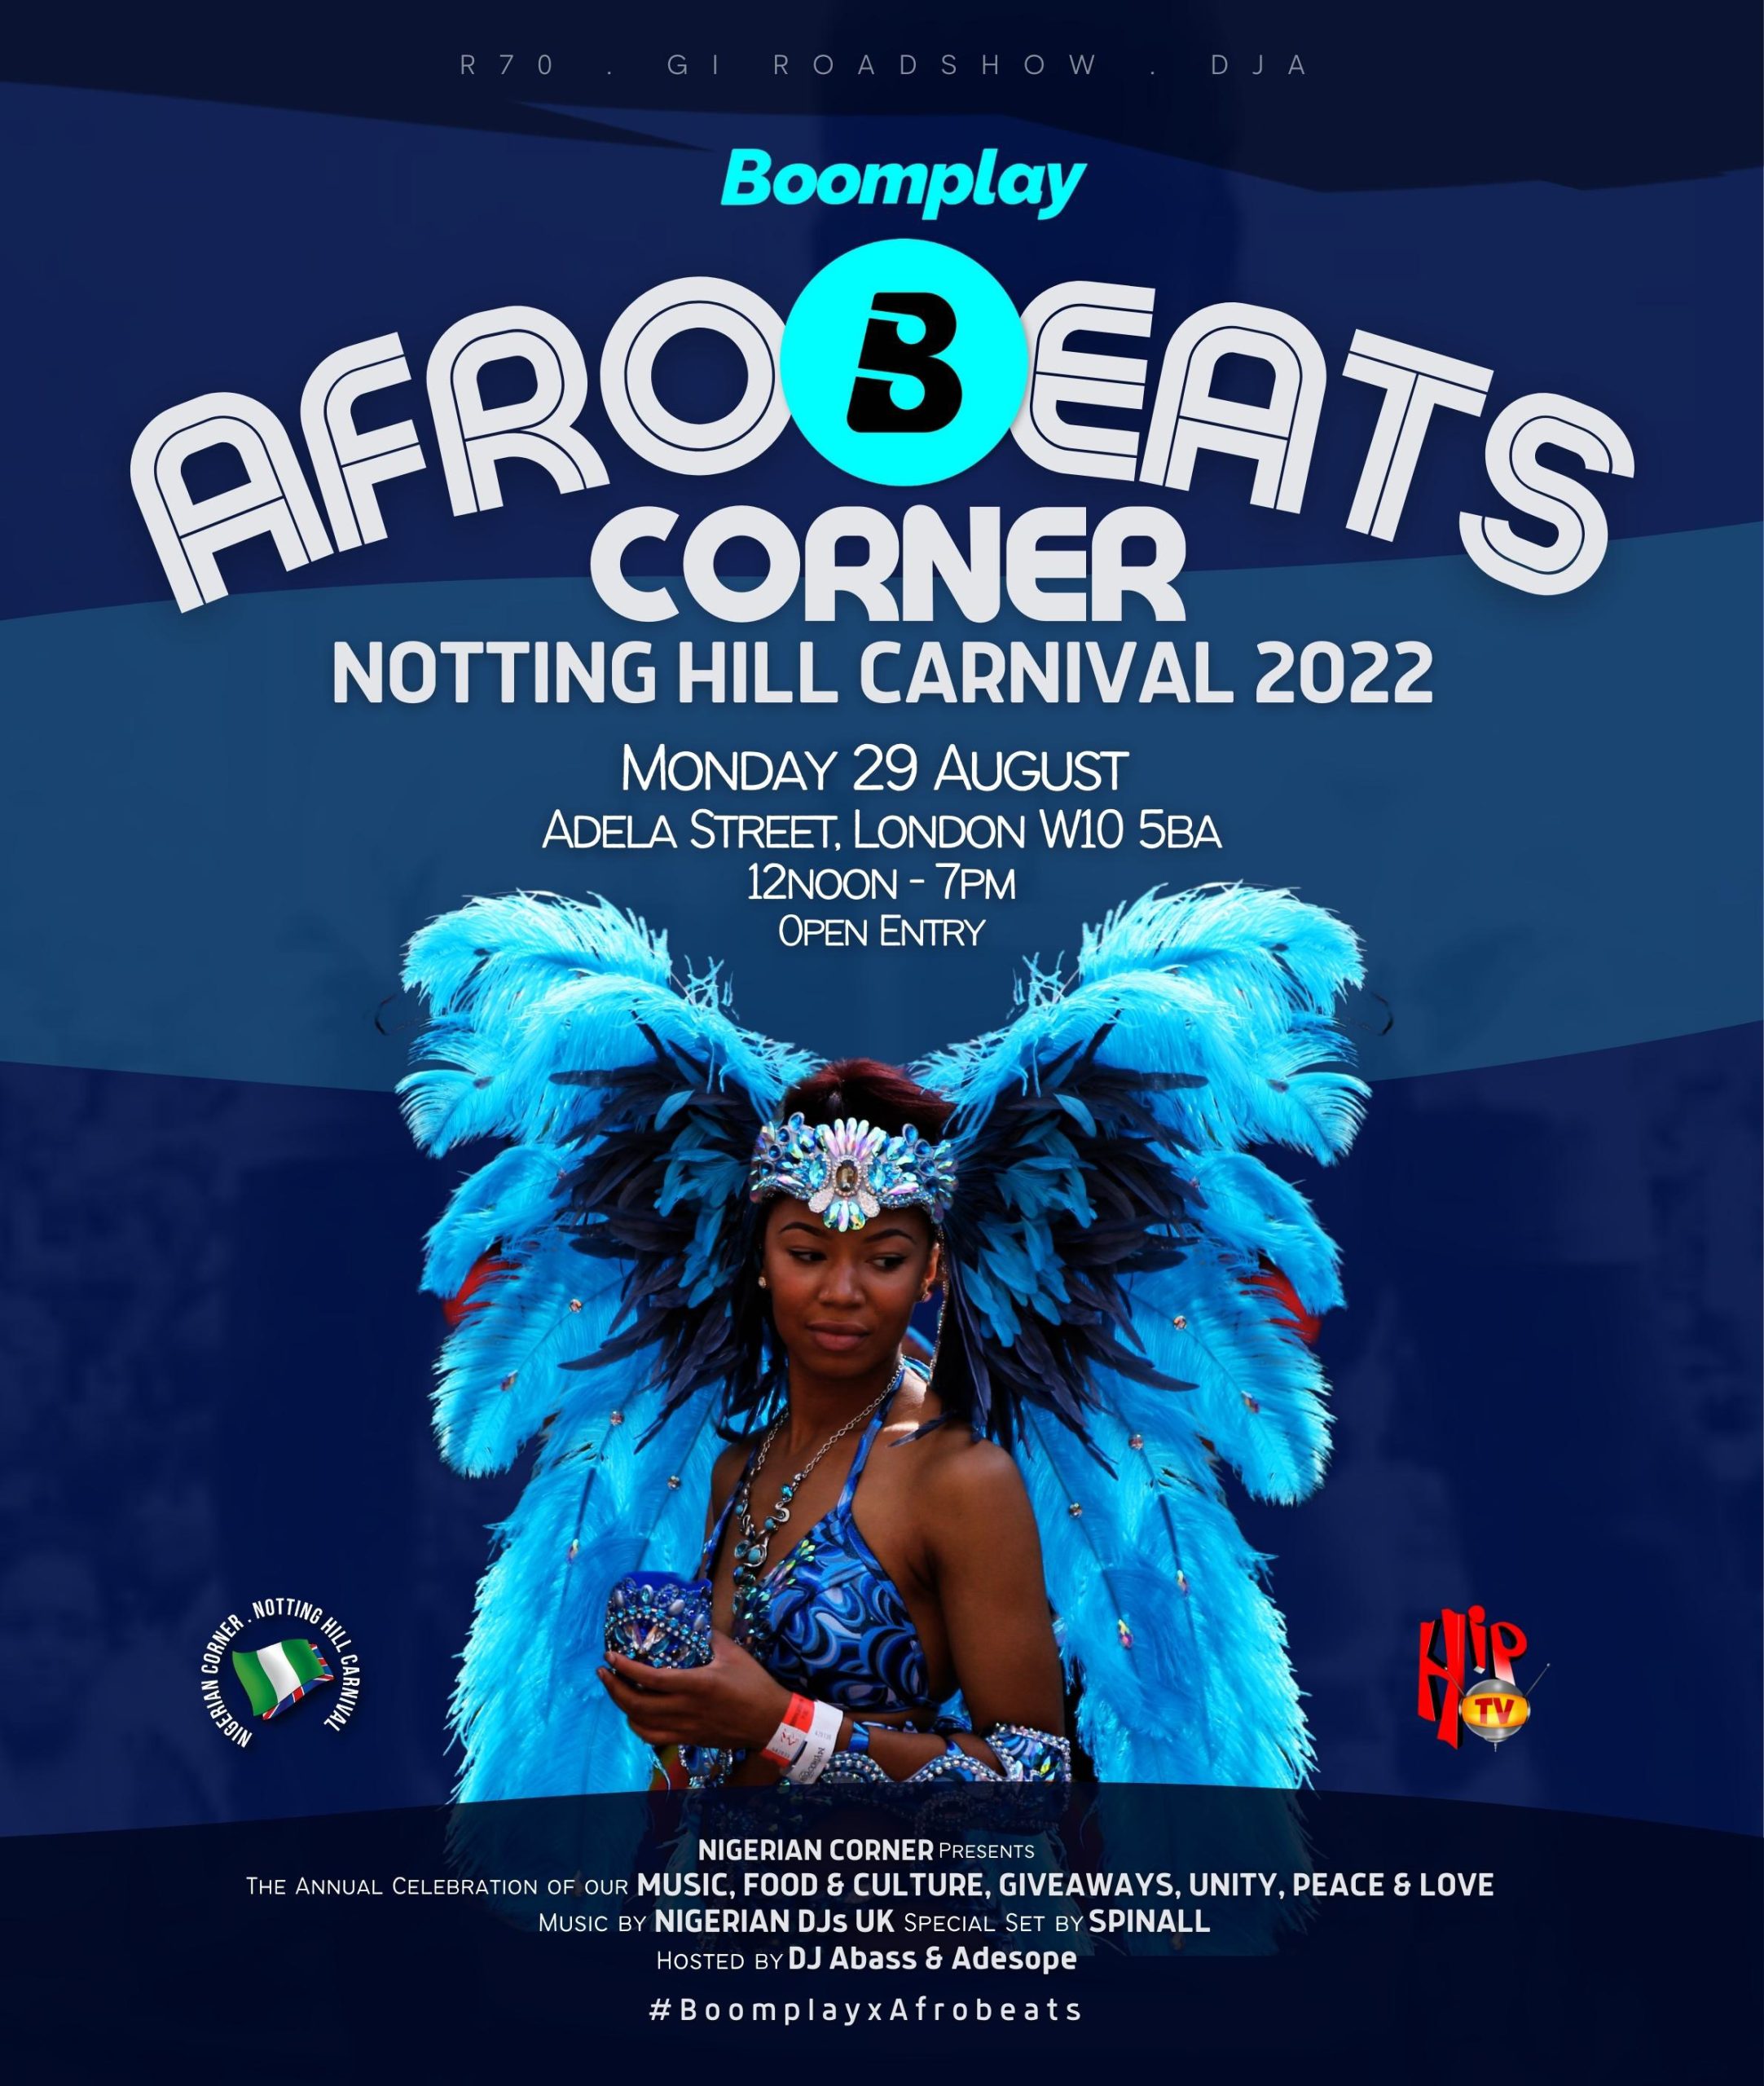 Boomplay to feature at 2022 Notting Hill Carnival with ‘Afrobeats Corner’